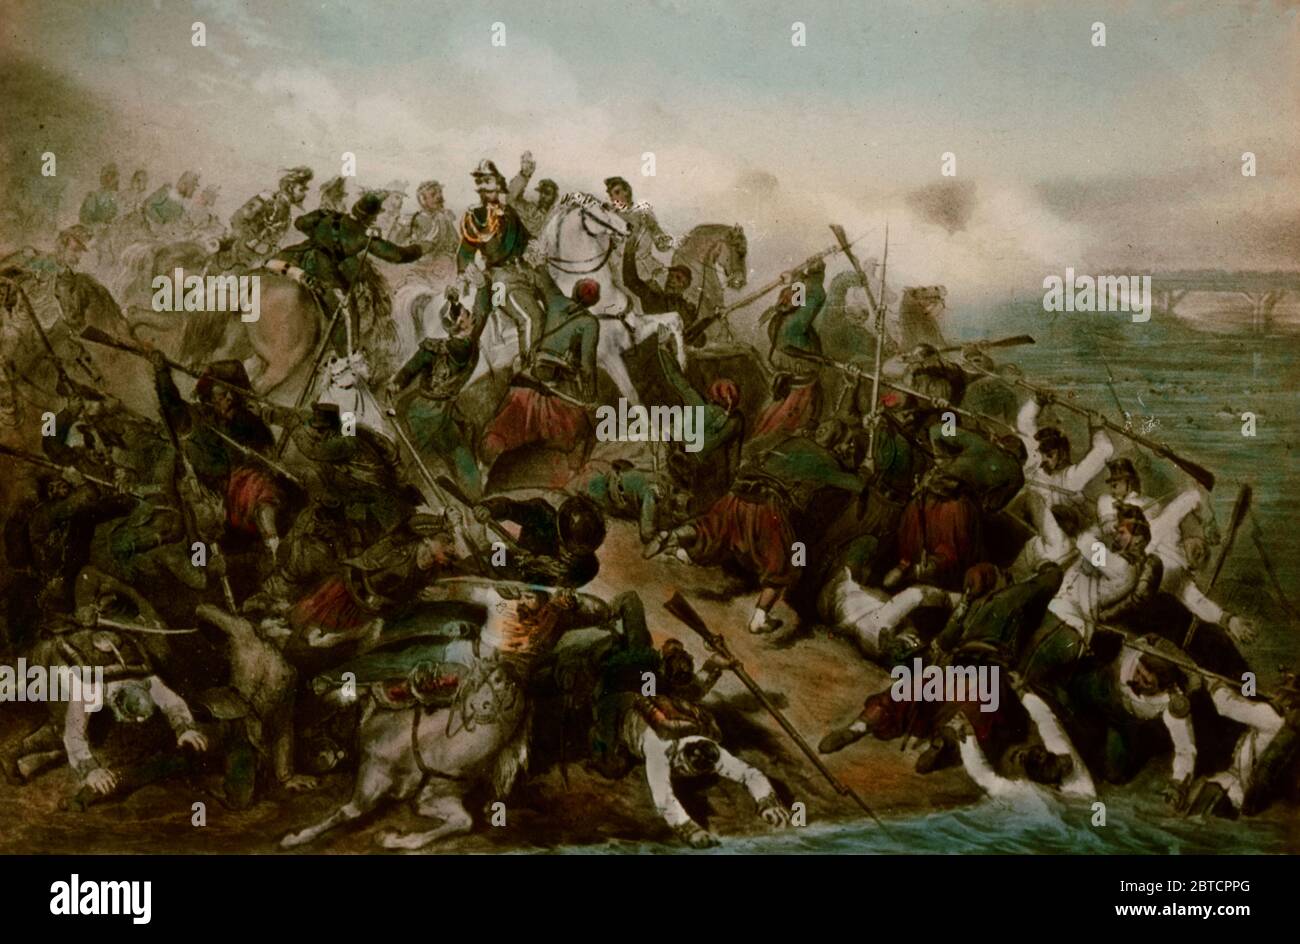 04 Aug 2013 Vintage Glass Painting of 1857 Mutiny or  Massacre Ghat Kanpur Second Battle of  Kanpur (then spelled Cawnpore) Uttar Pradesh India Stock Photo